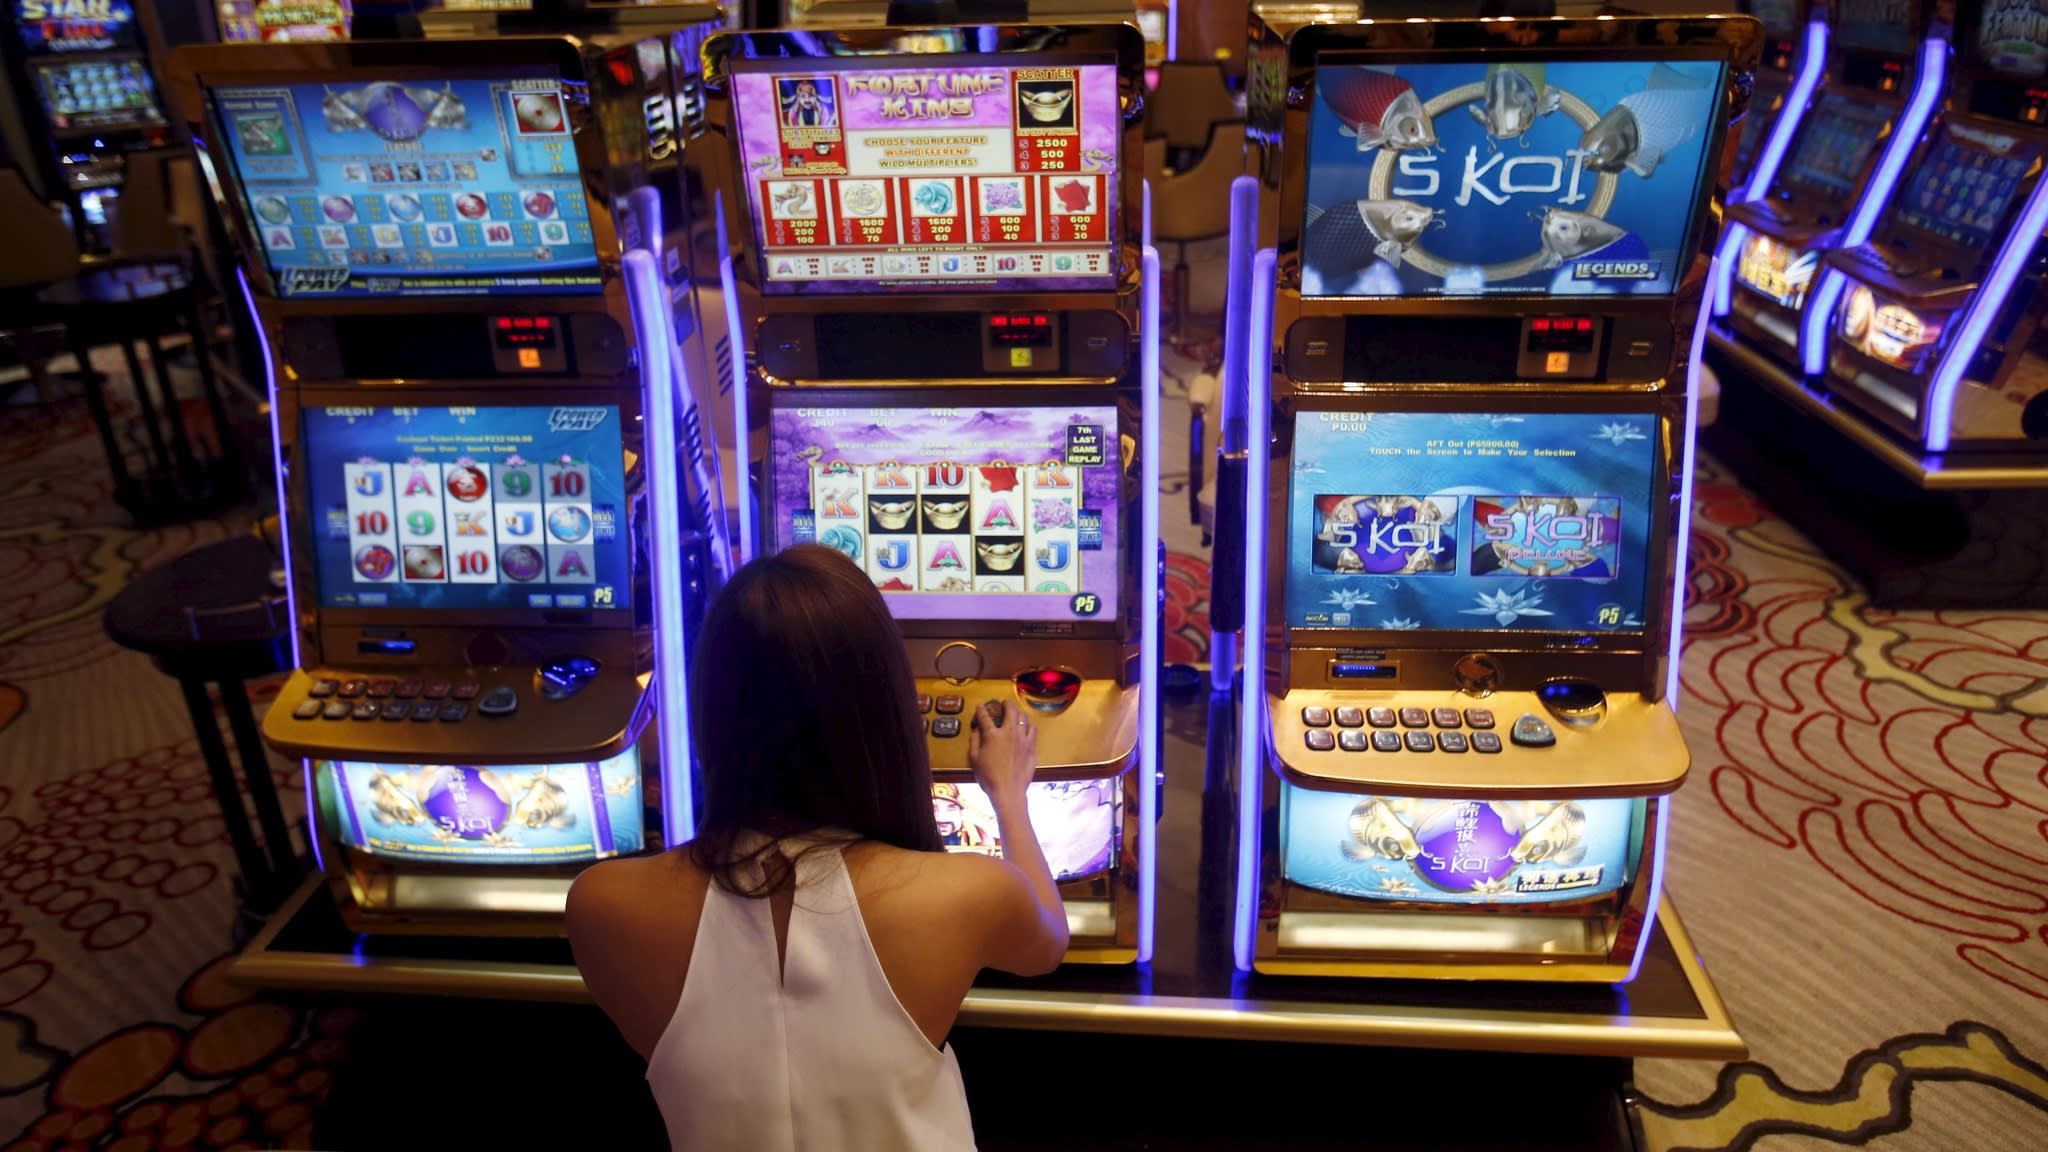 Marriage And box24 casino Have More In Common Than You Think